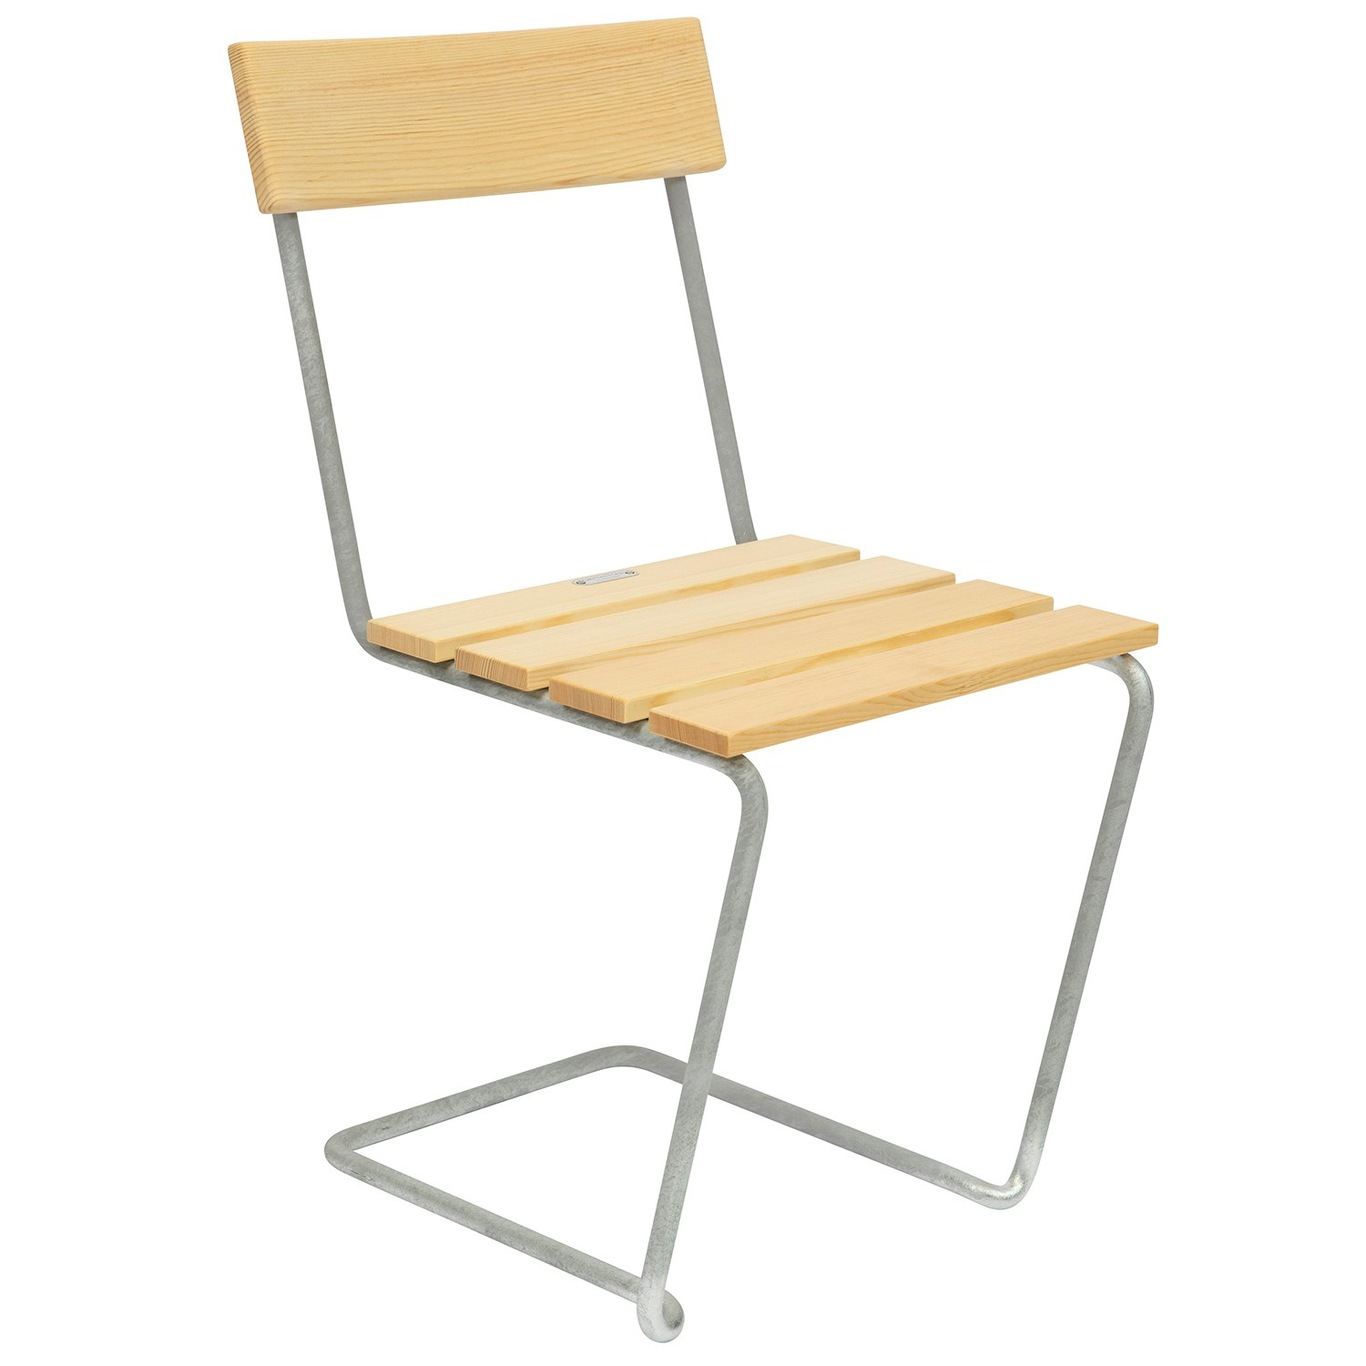 Chair 1, Oiled Pine / Hot Galvanized Steel